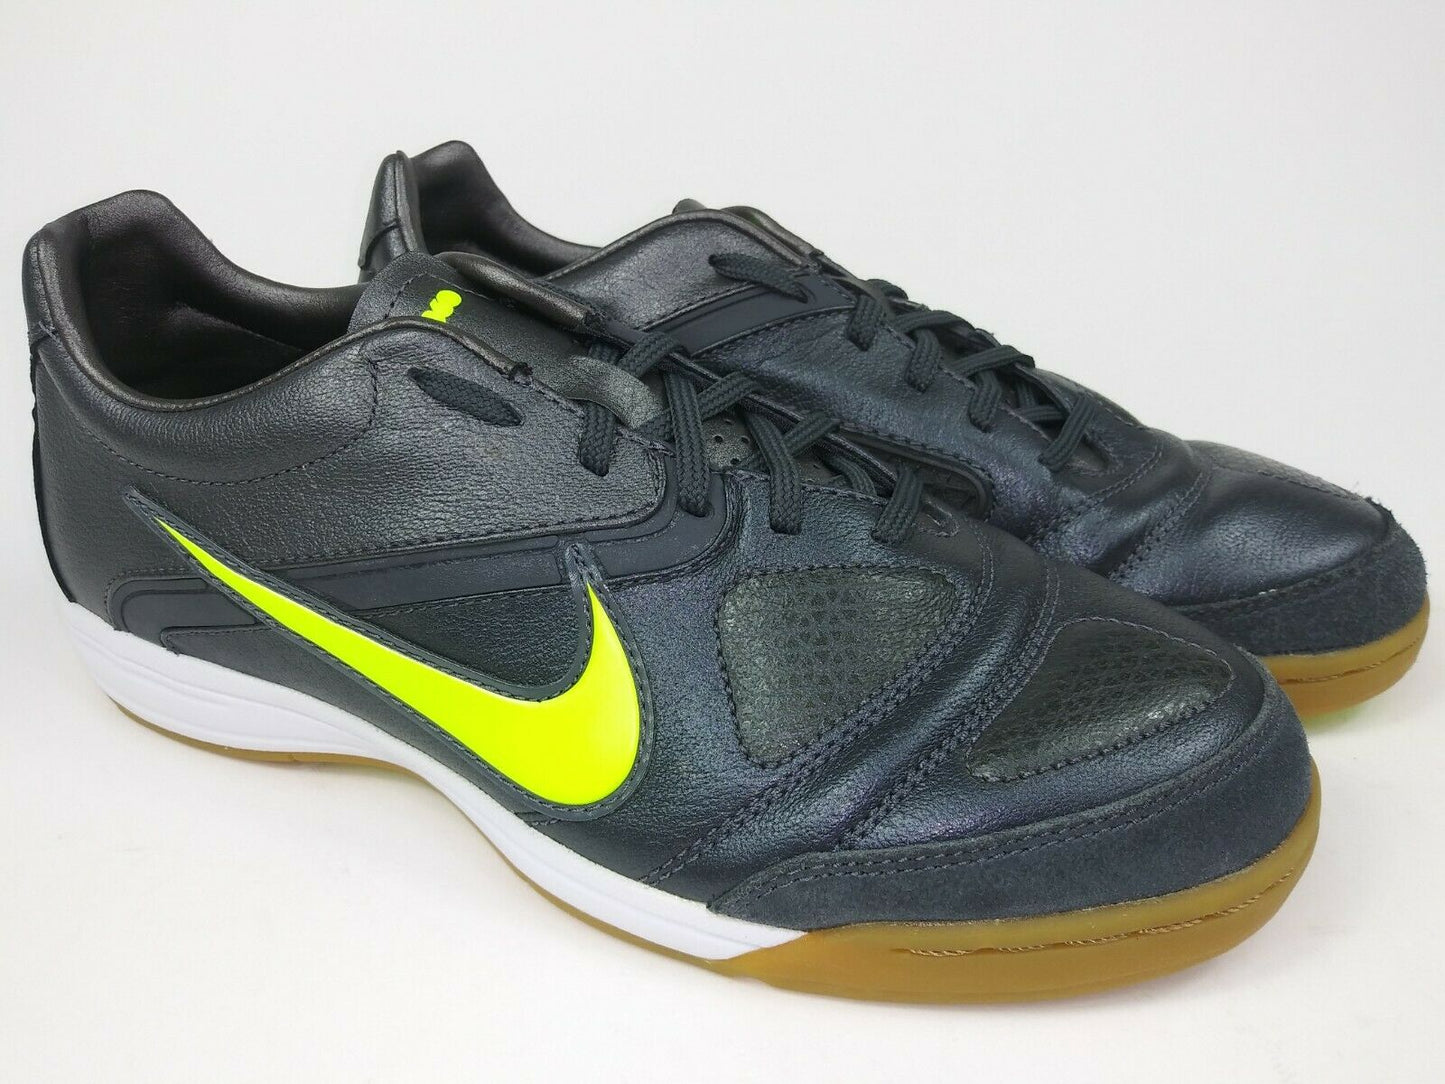 Nike CTR 360 Libretto ll IC Indoor Shoes Grey